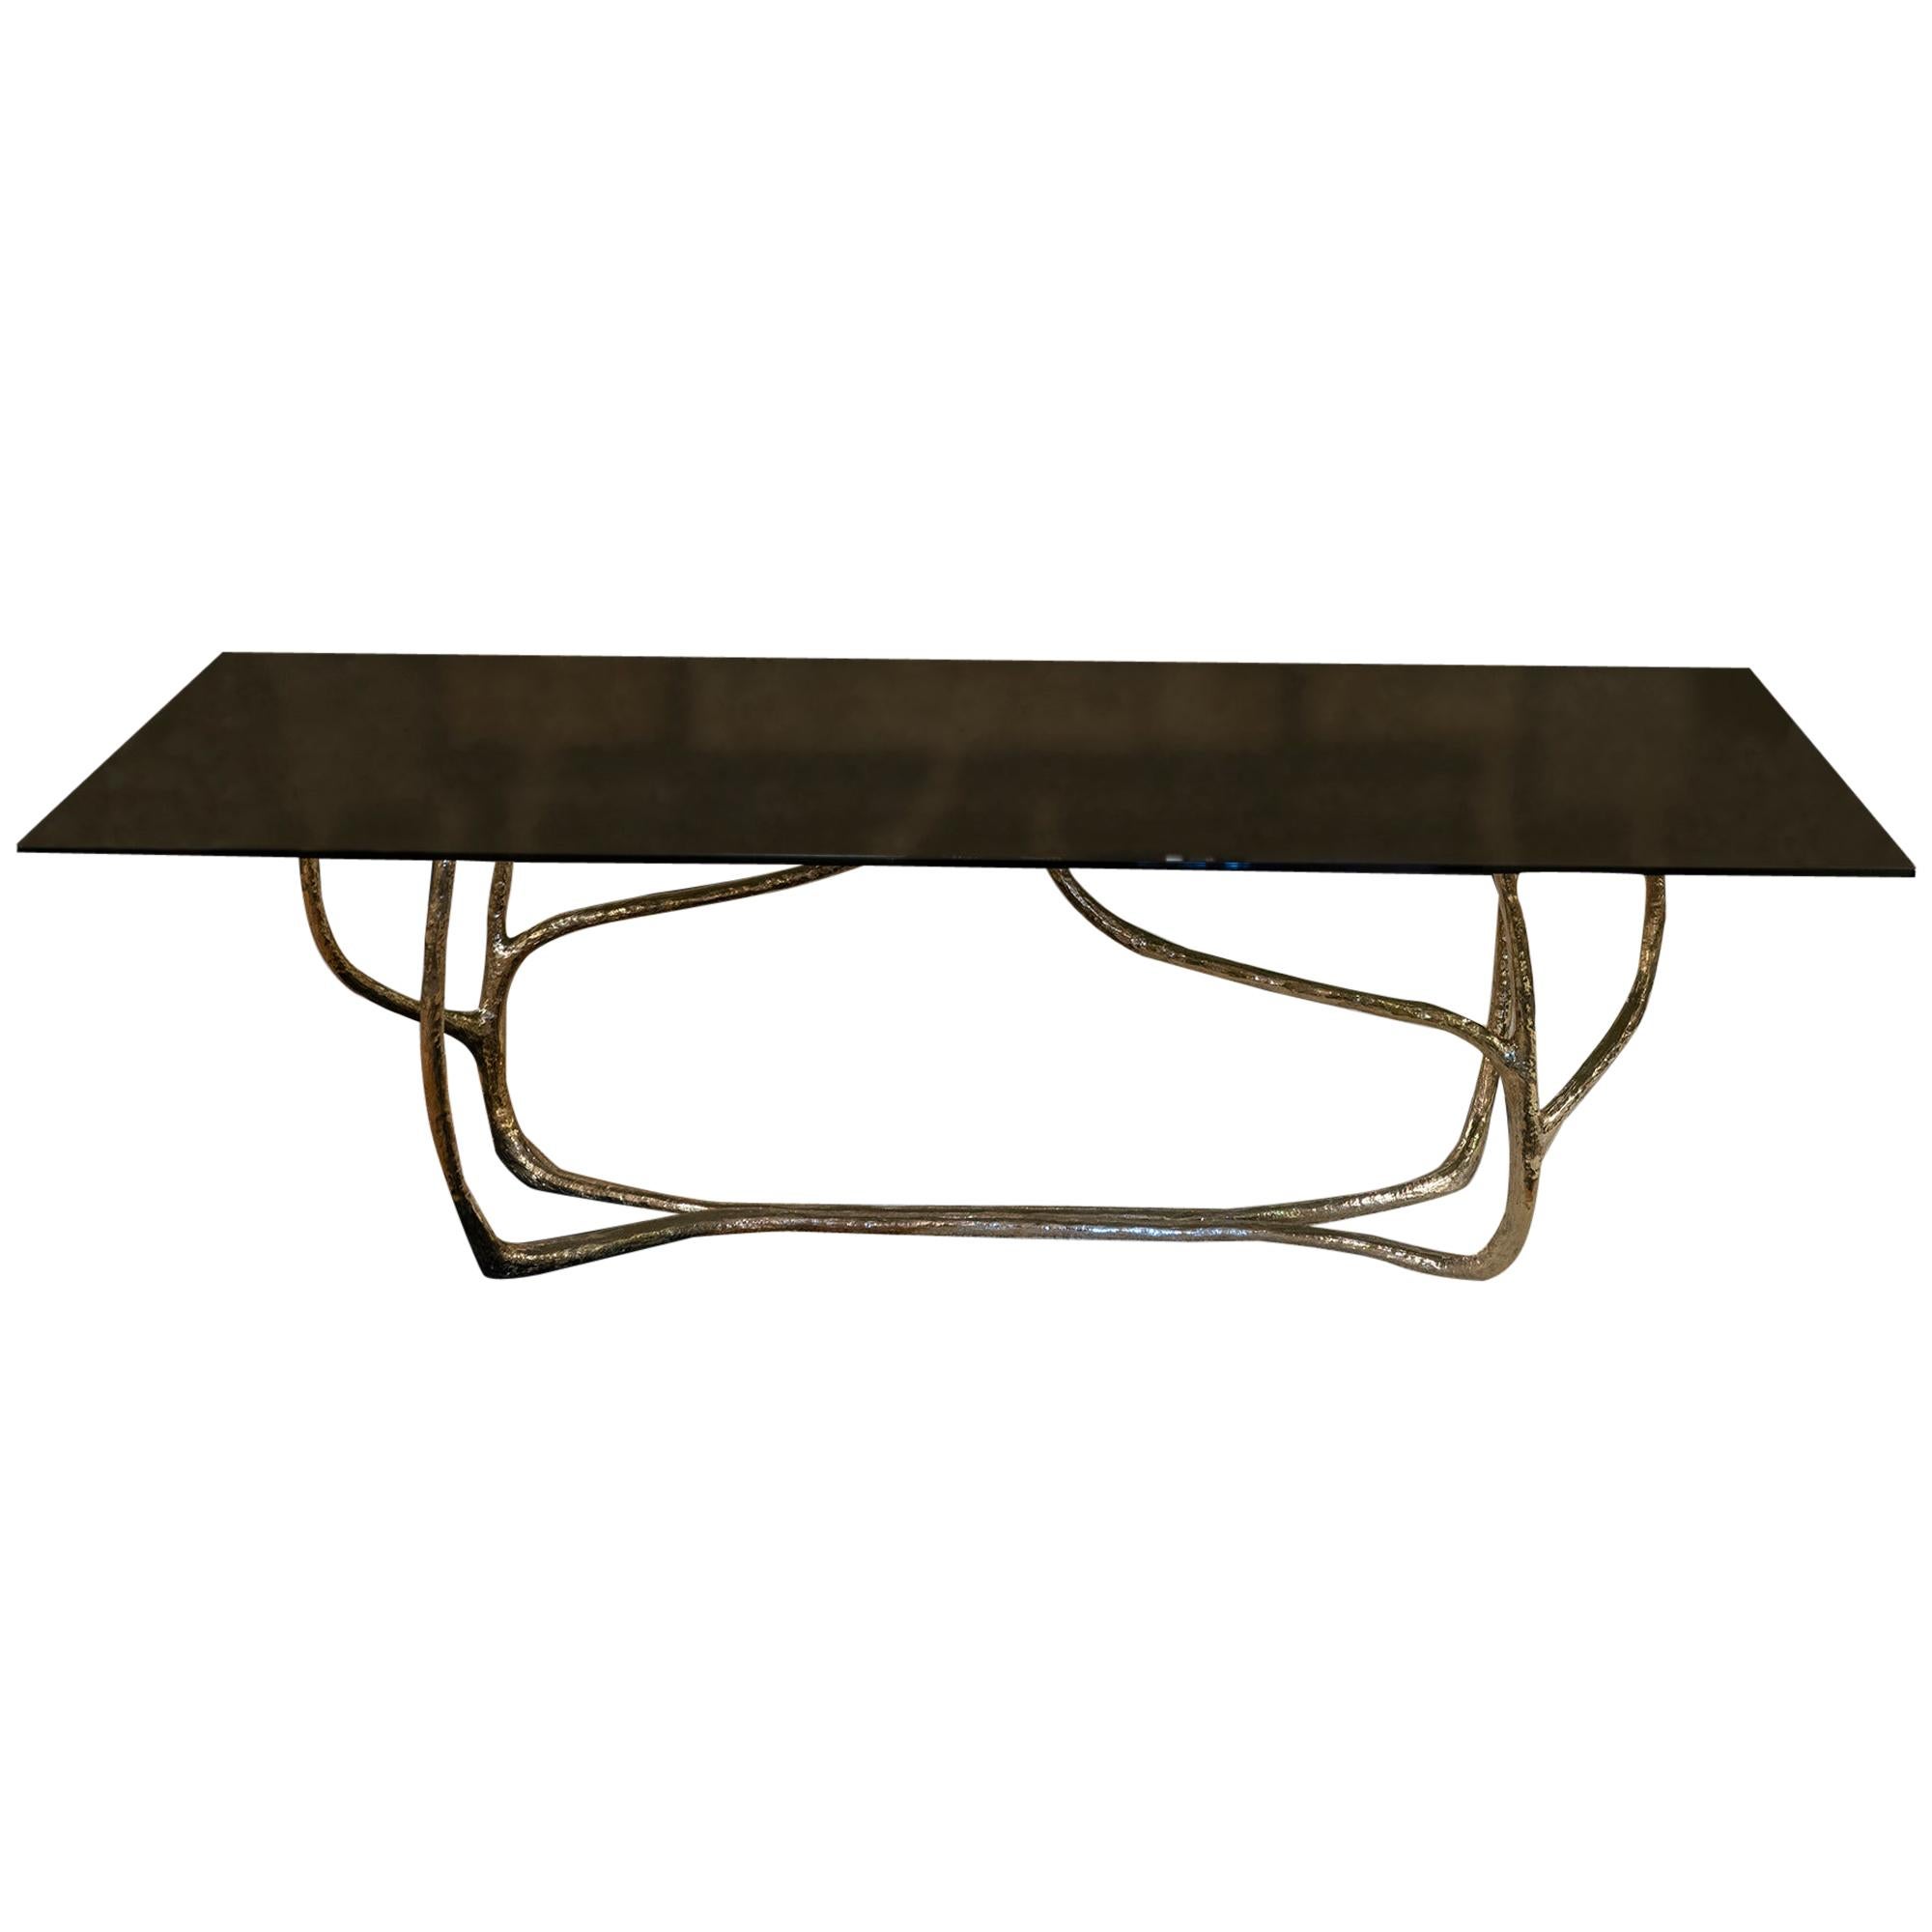 Contemporary Sculptural Center or Dining Table, Brass and Smoked Tempered Glass